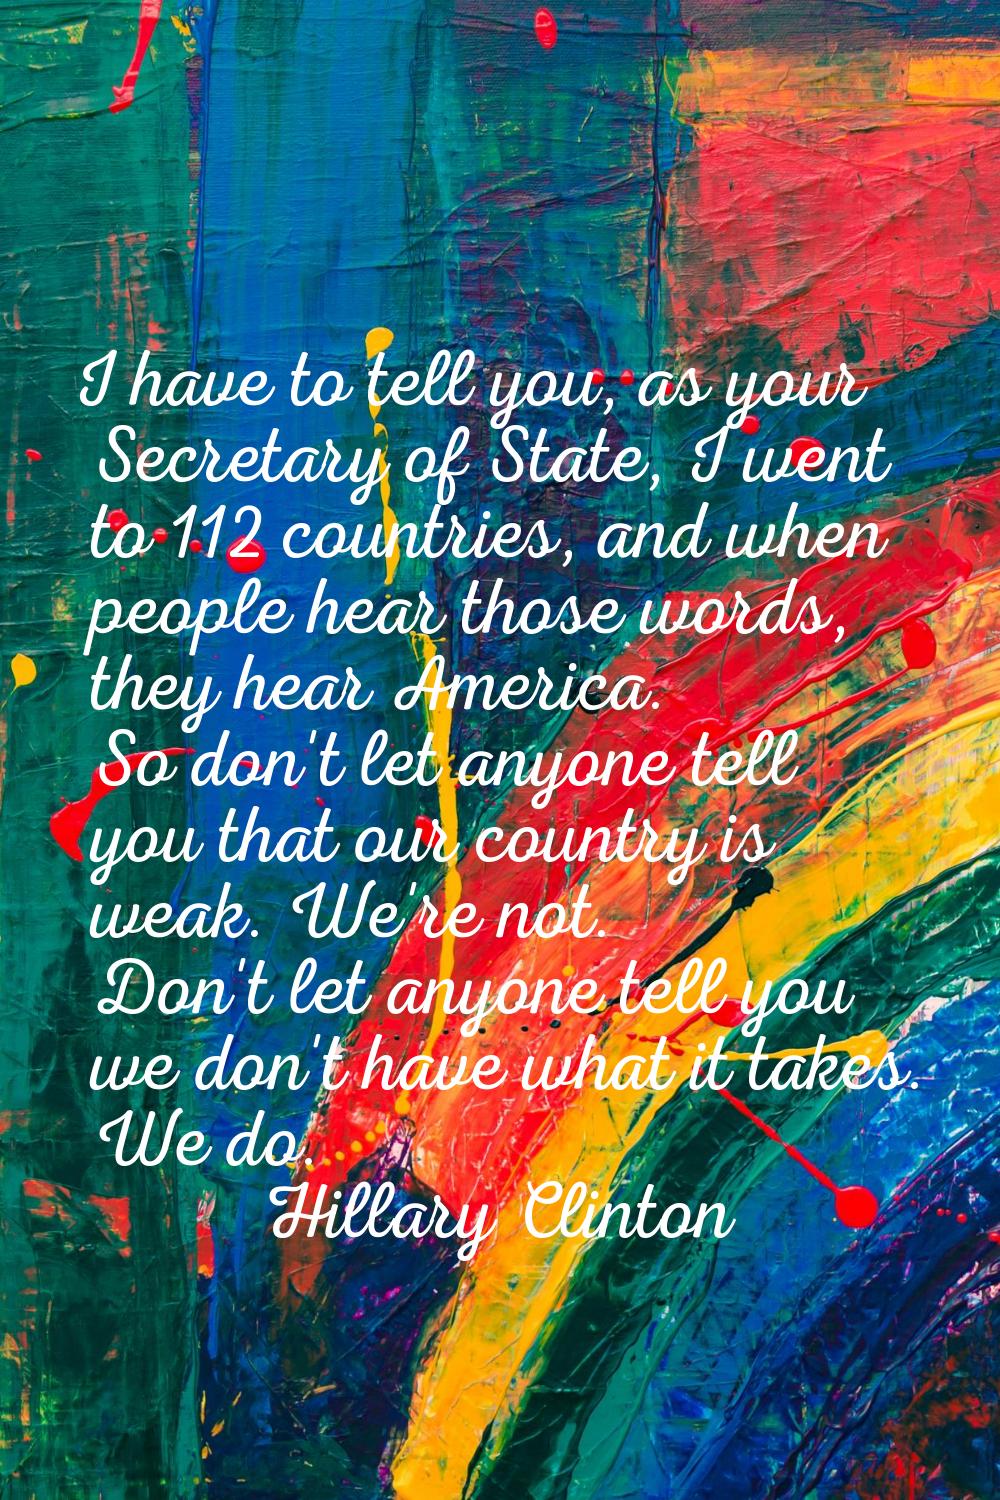 I have to tell you, as your Secretary of State, I went to 112 countries, and when people hear those